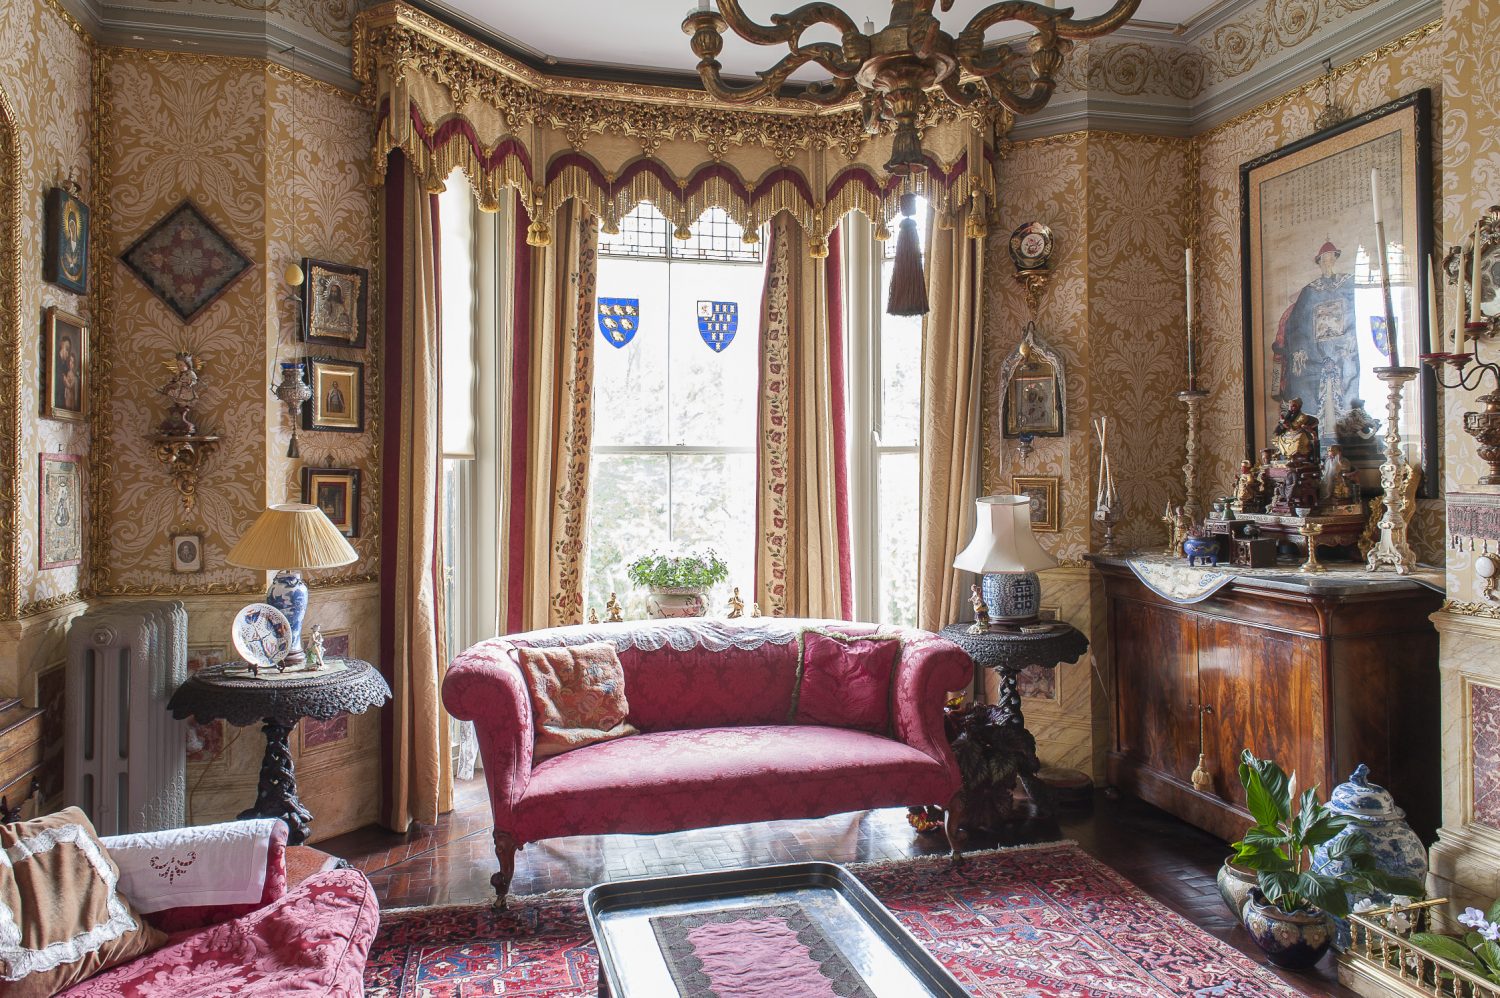 Decorative bullion and tassels hang from the elaborate pelmets in the drawing room